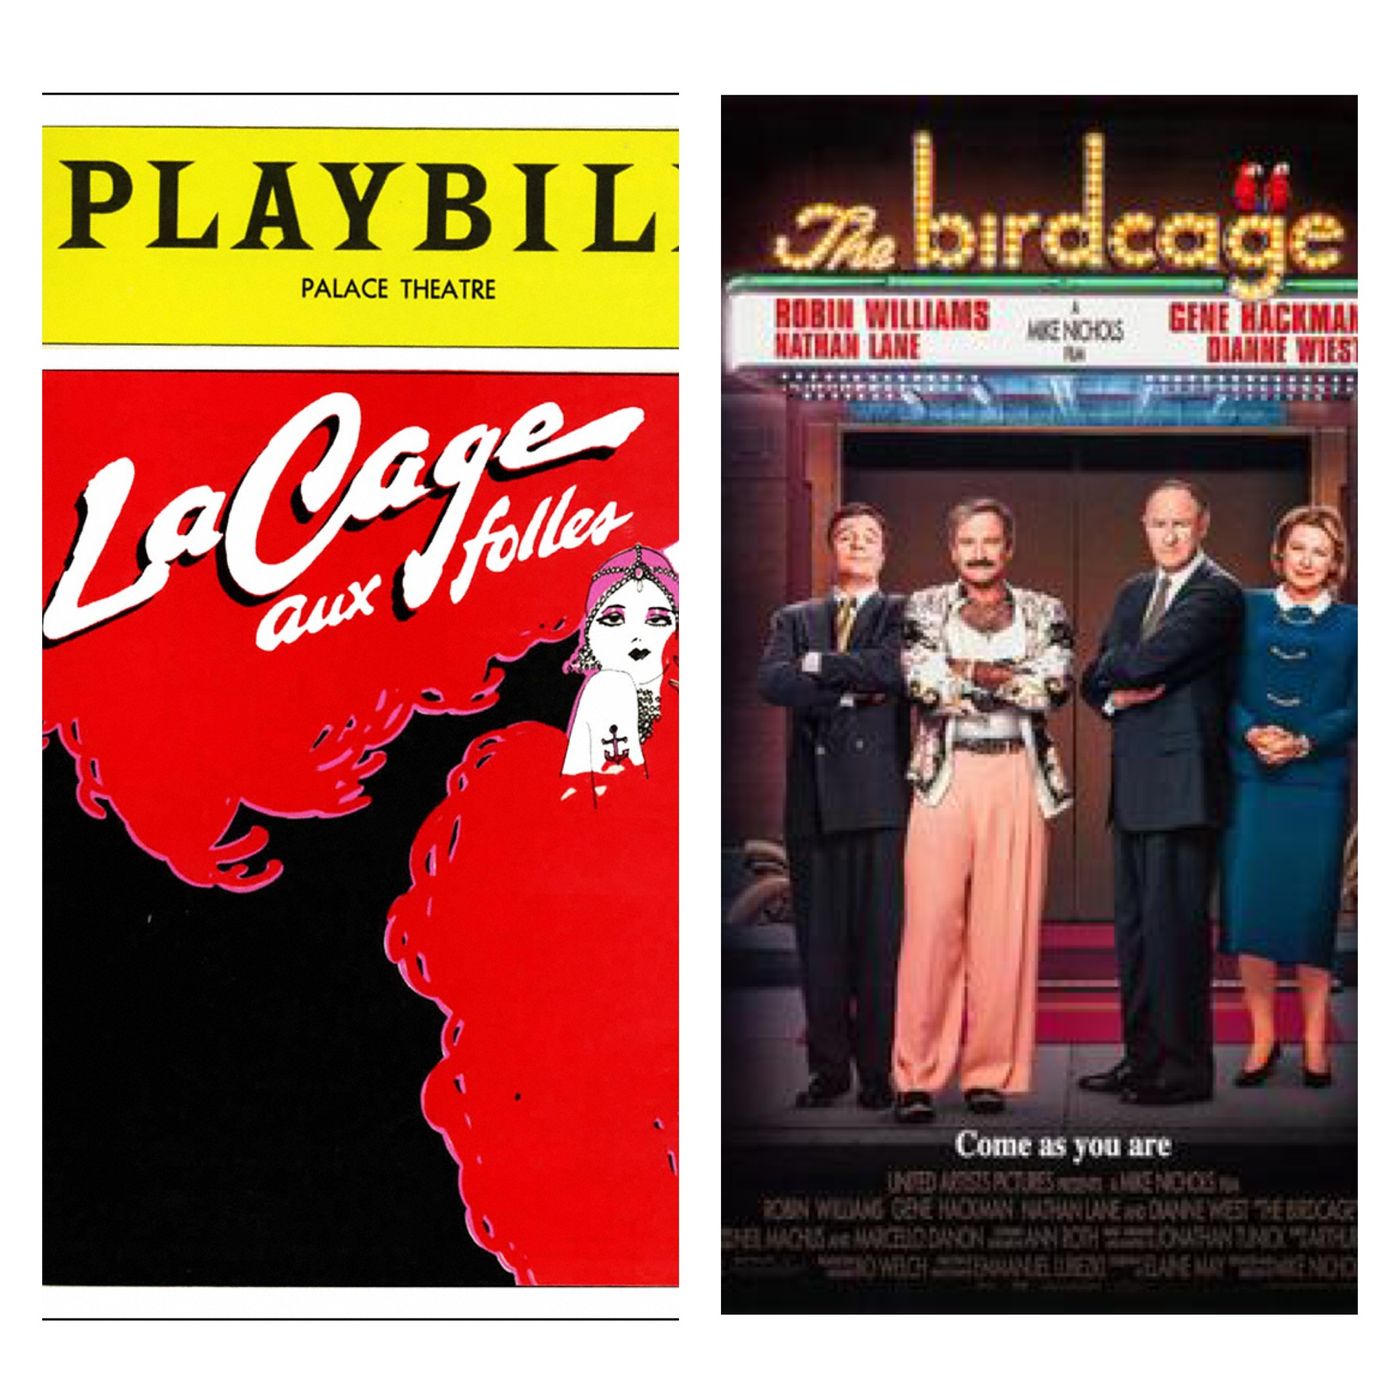 La Cage aux Folles Vs. The Birdcage: The early film/musical & the Robin Williams, Nathan Lane 1996 film